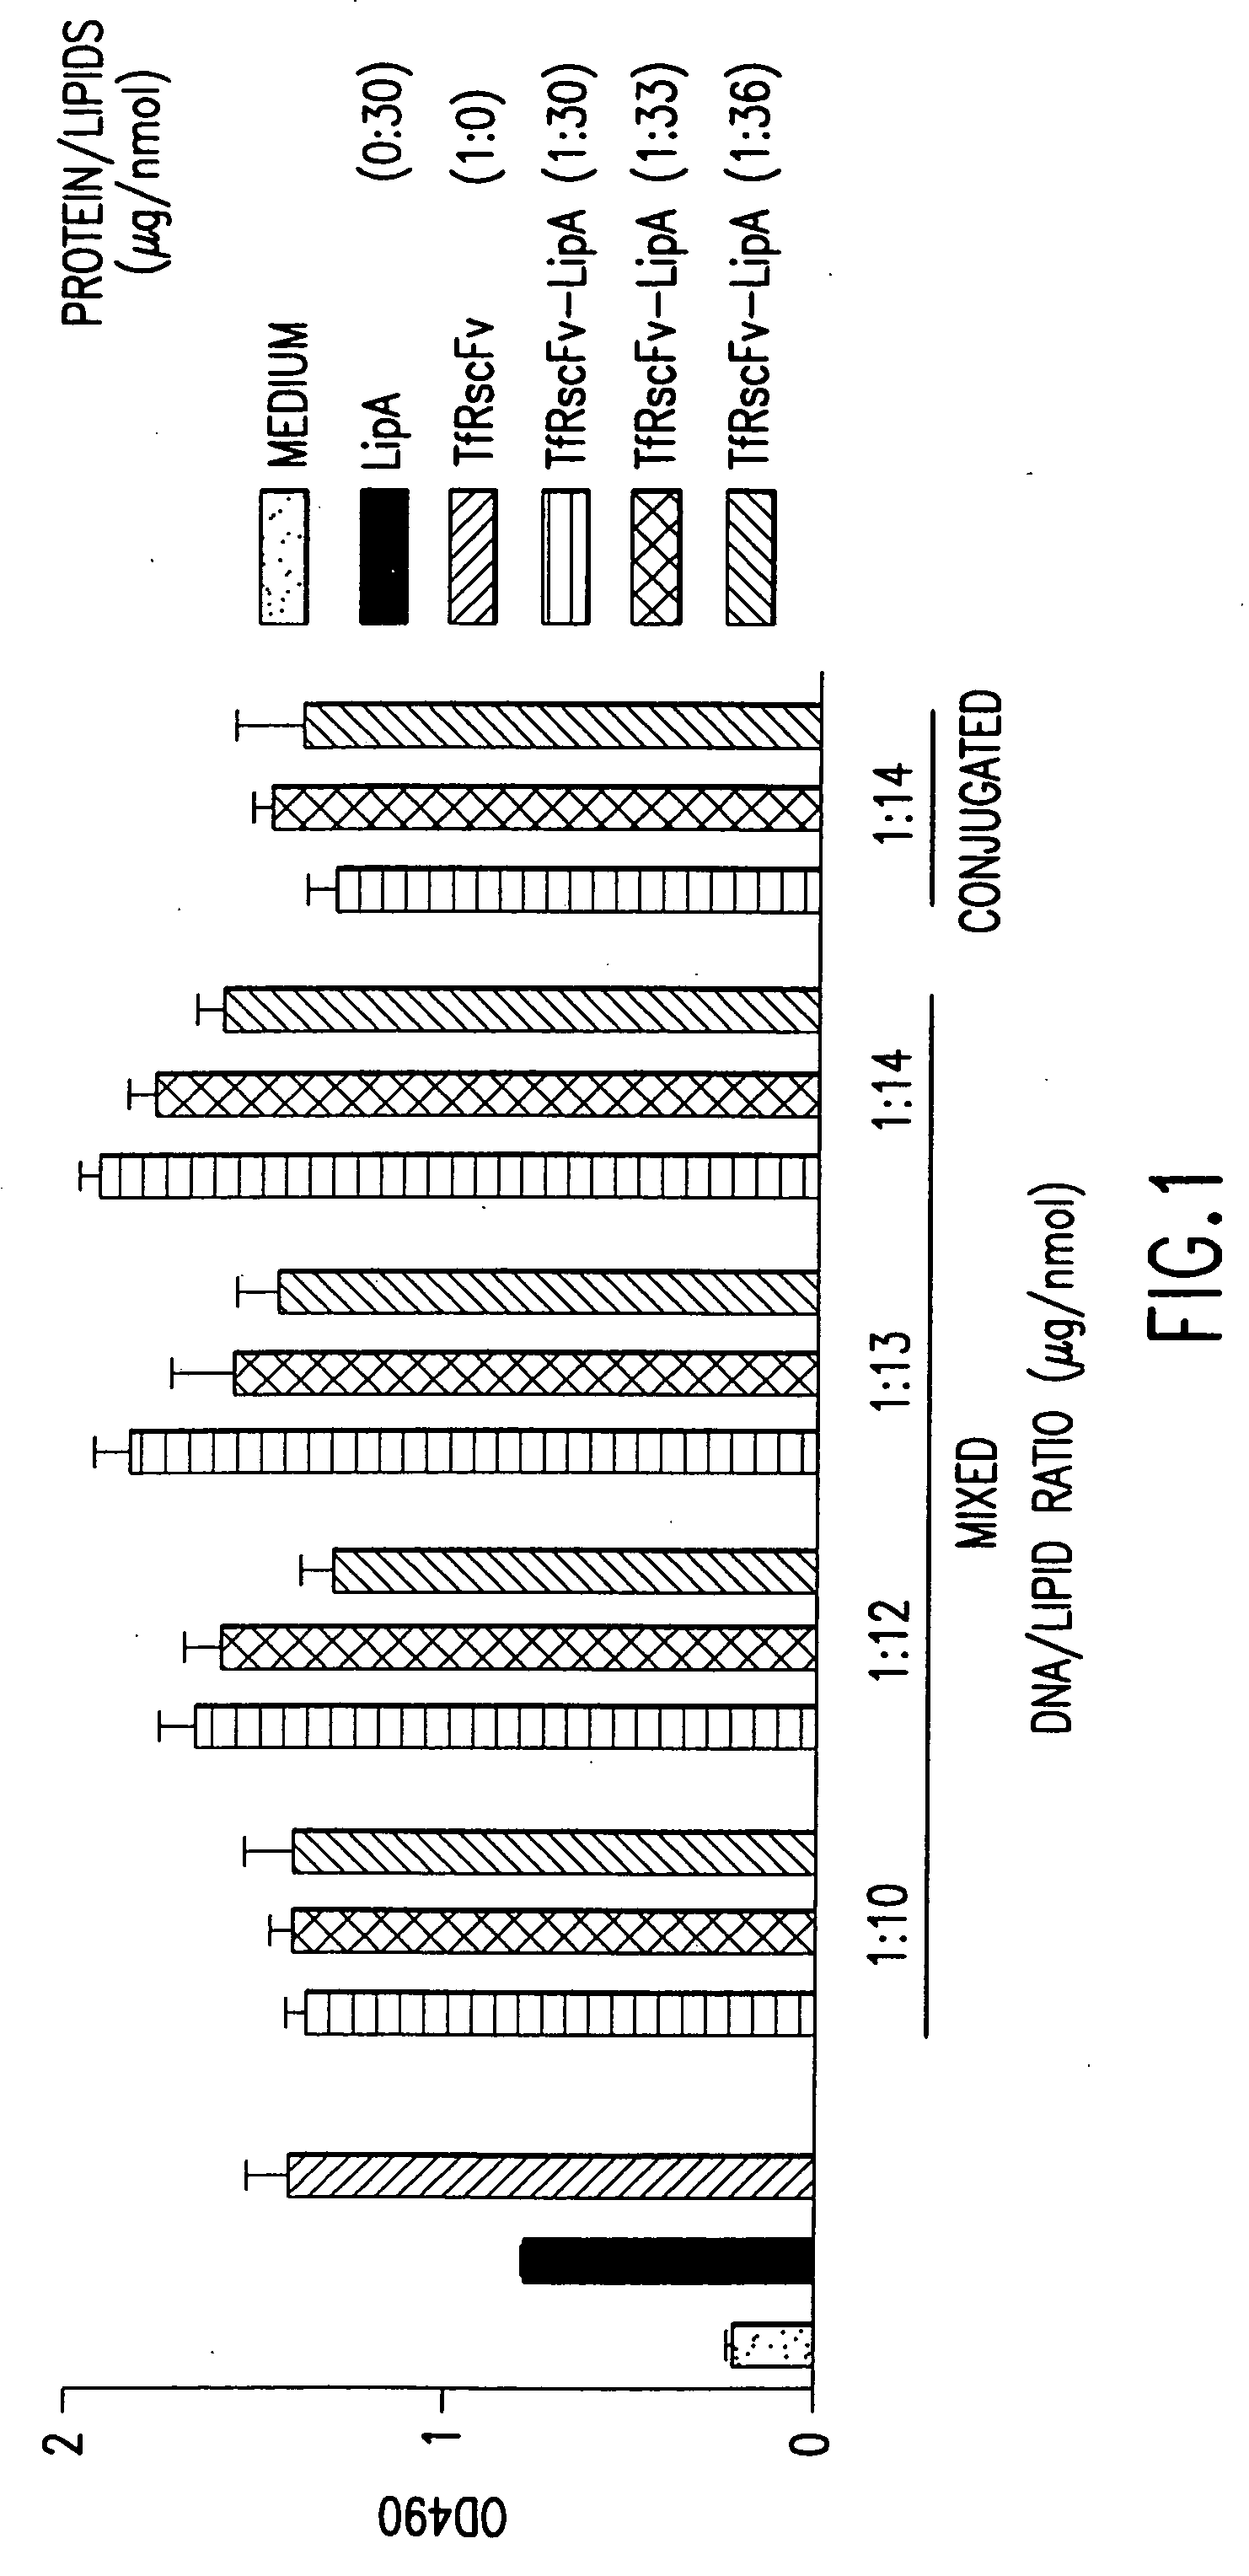 Preparation of antibody or an antibody fragment-targeted immunoliposomes for systemic administration of therapeutic or diagnostic agents and uses thereof